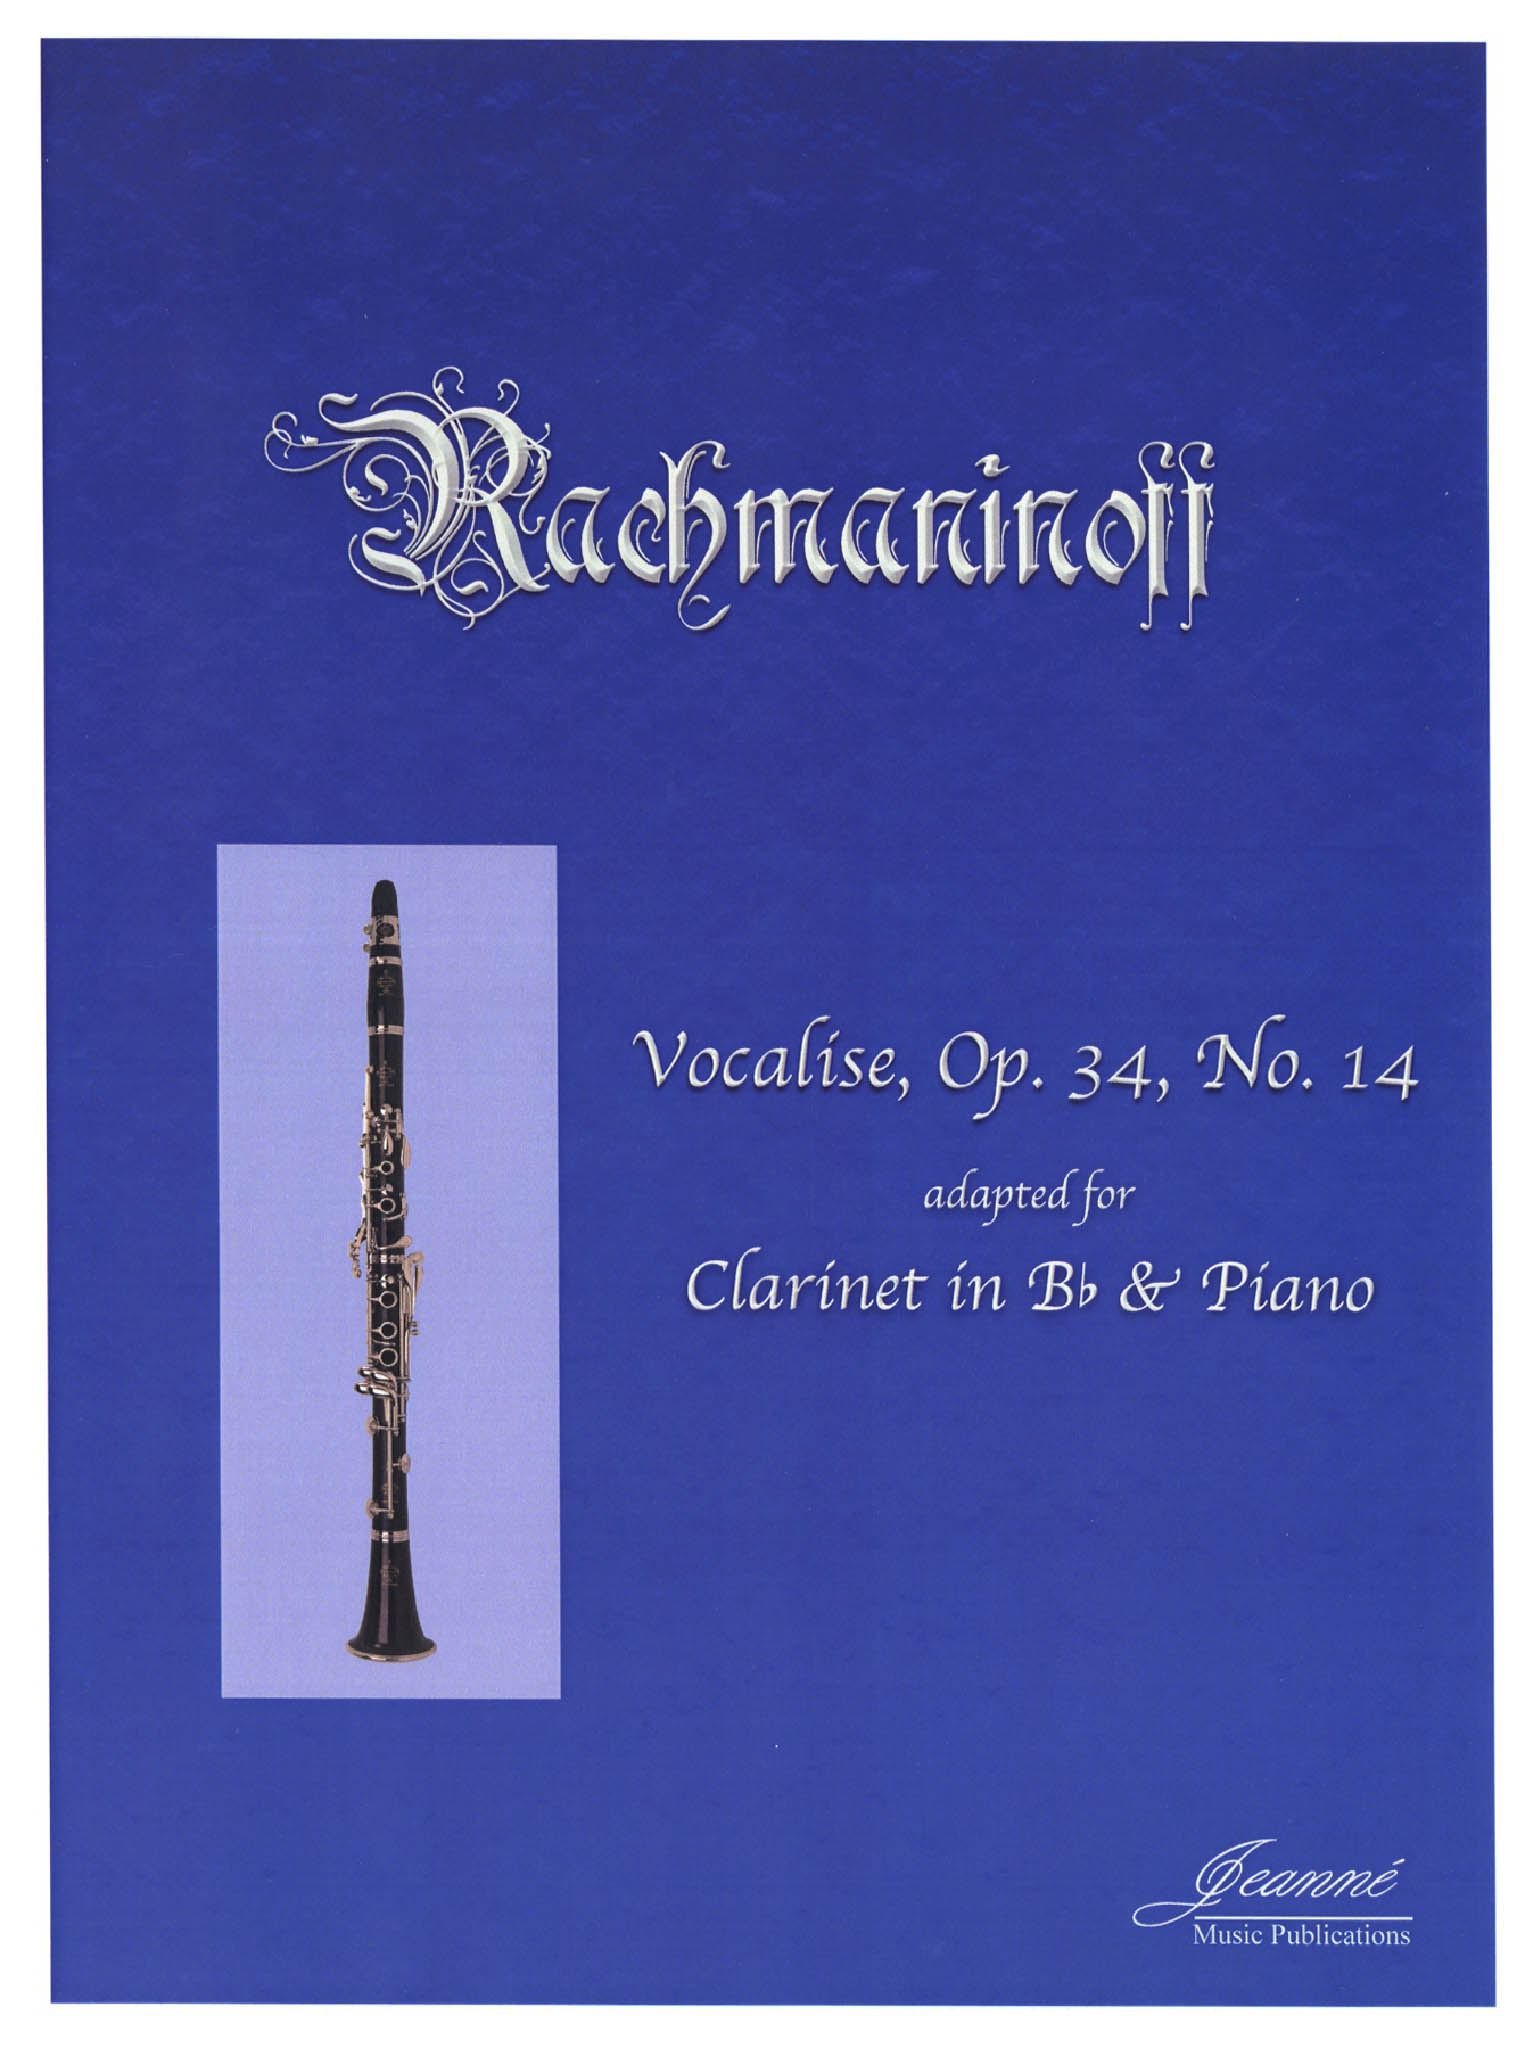 Rachmaninoff Vocalise Op. 34 No. 14 Cover